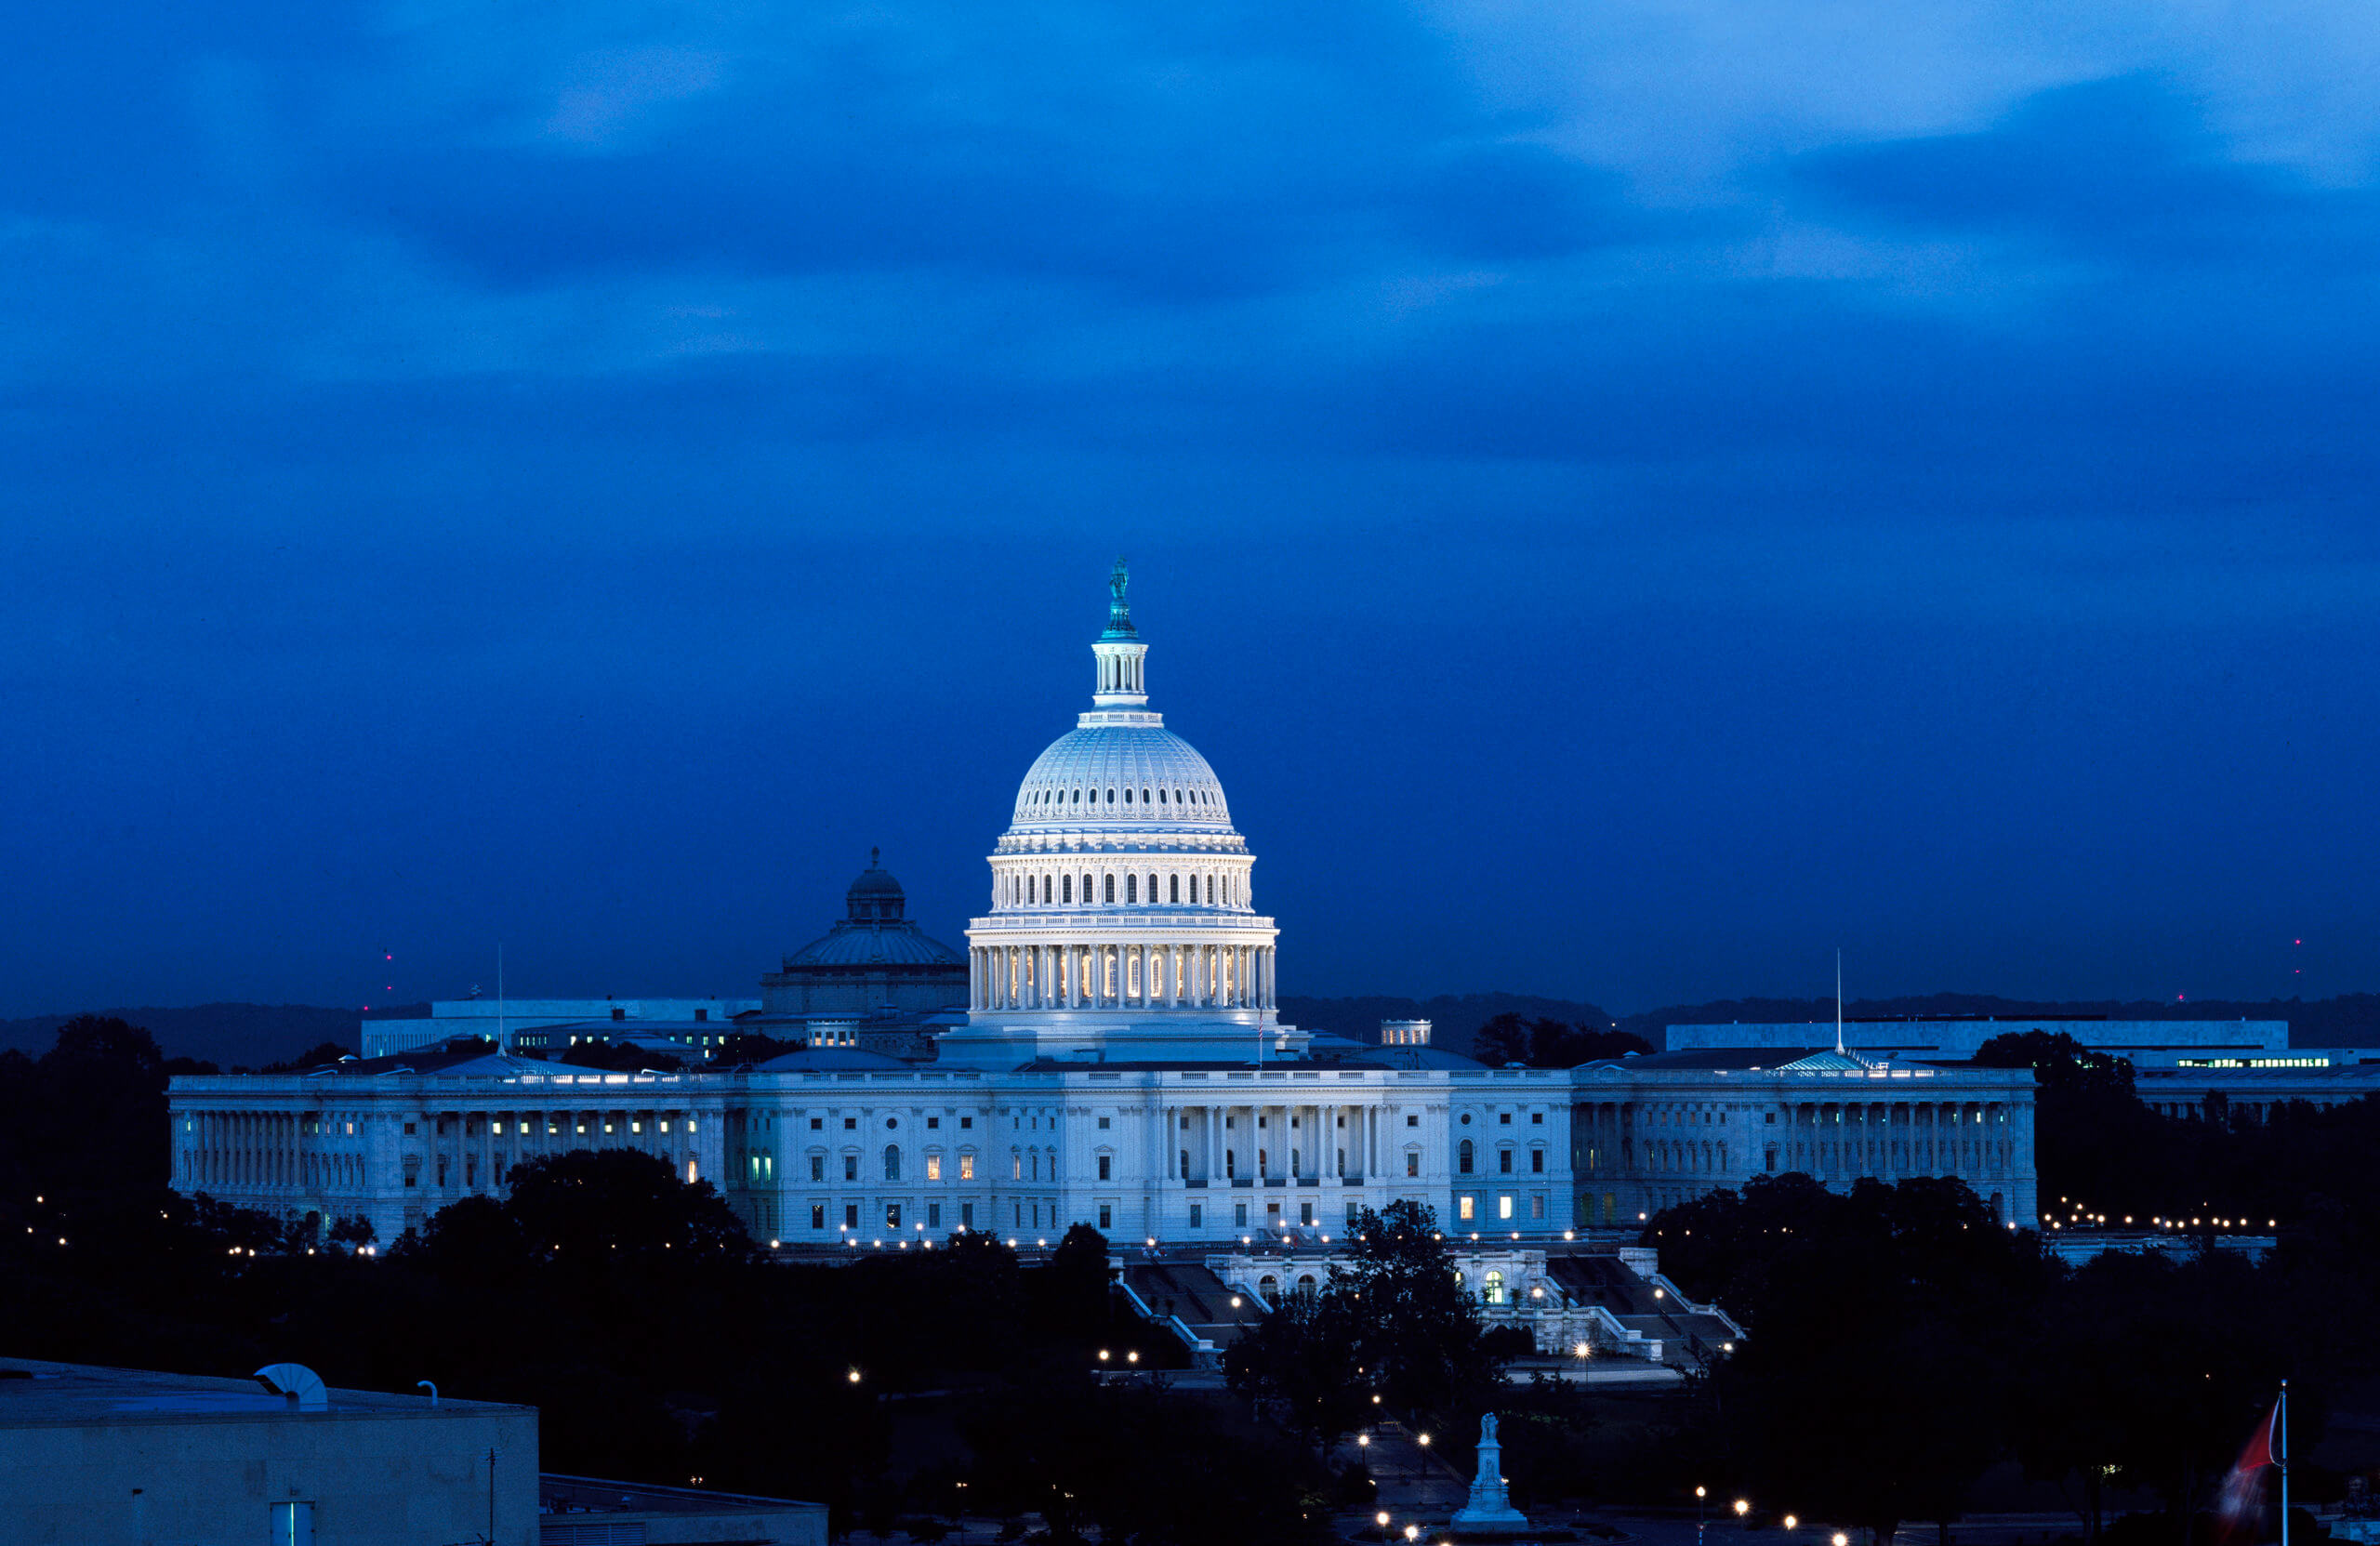 The U.S. Capitol at night. The Dome glows white against a dark blue sky.